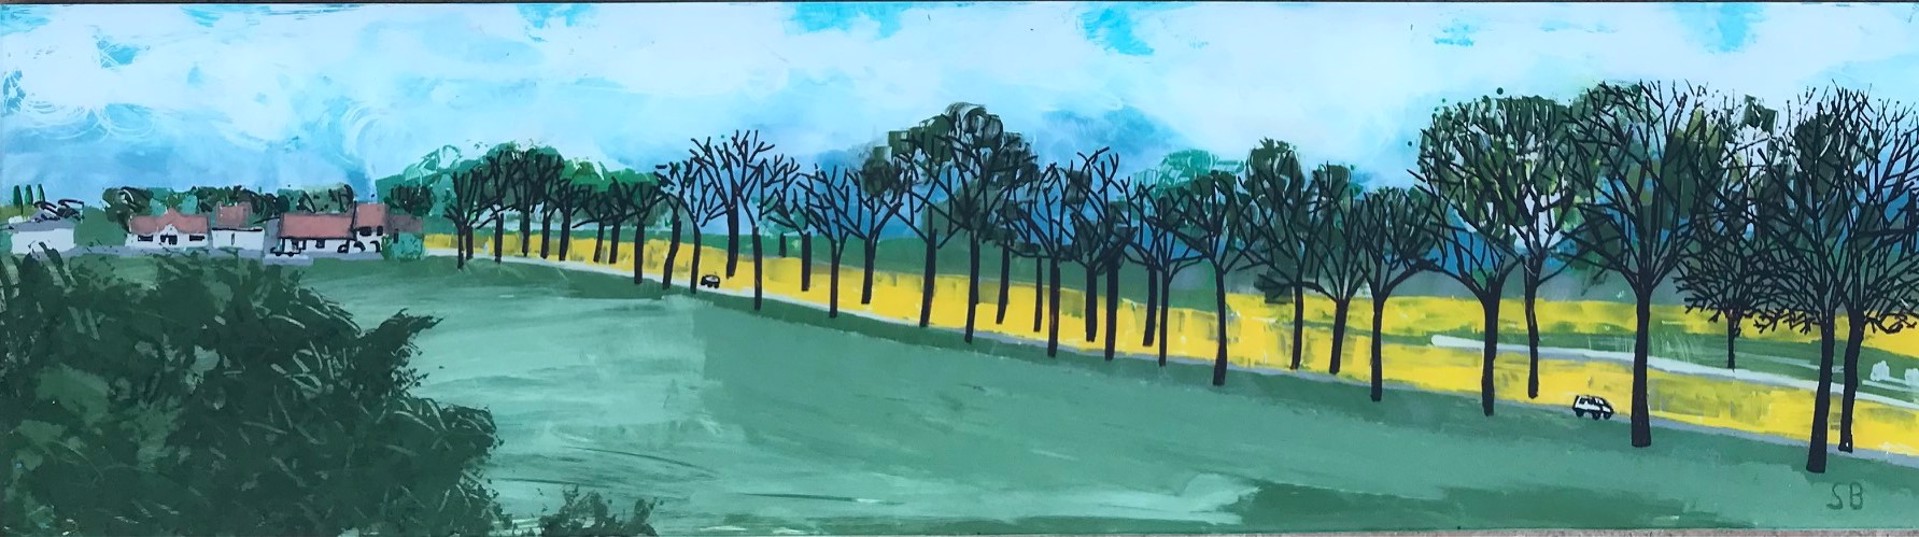 The Road To Paris 2 (Tree-lined Drive) by Stephanie Bucholz